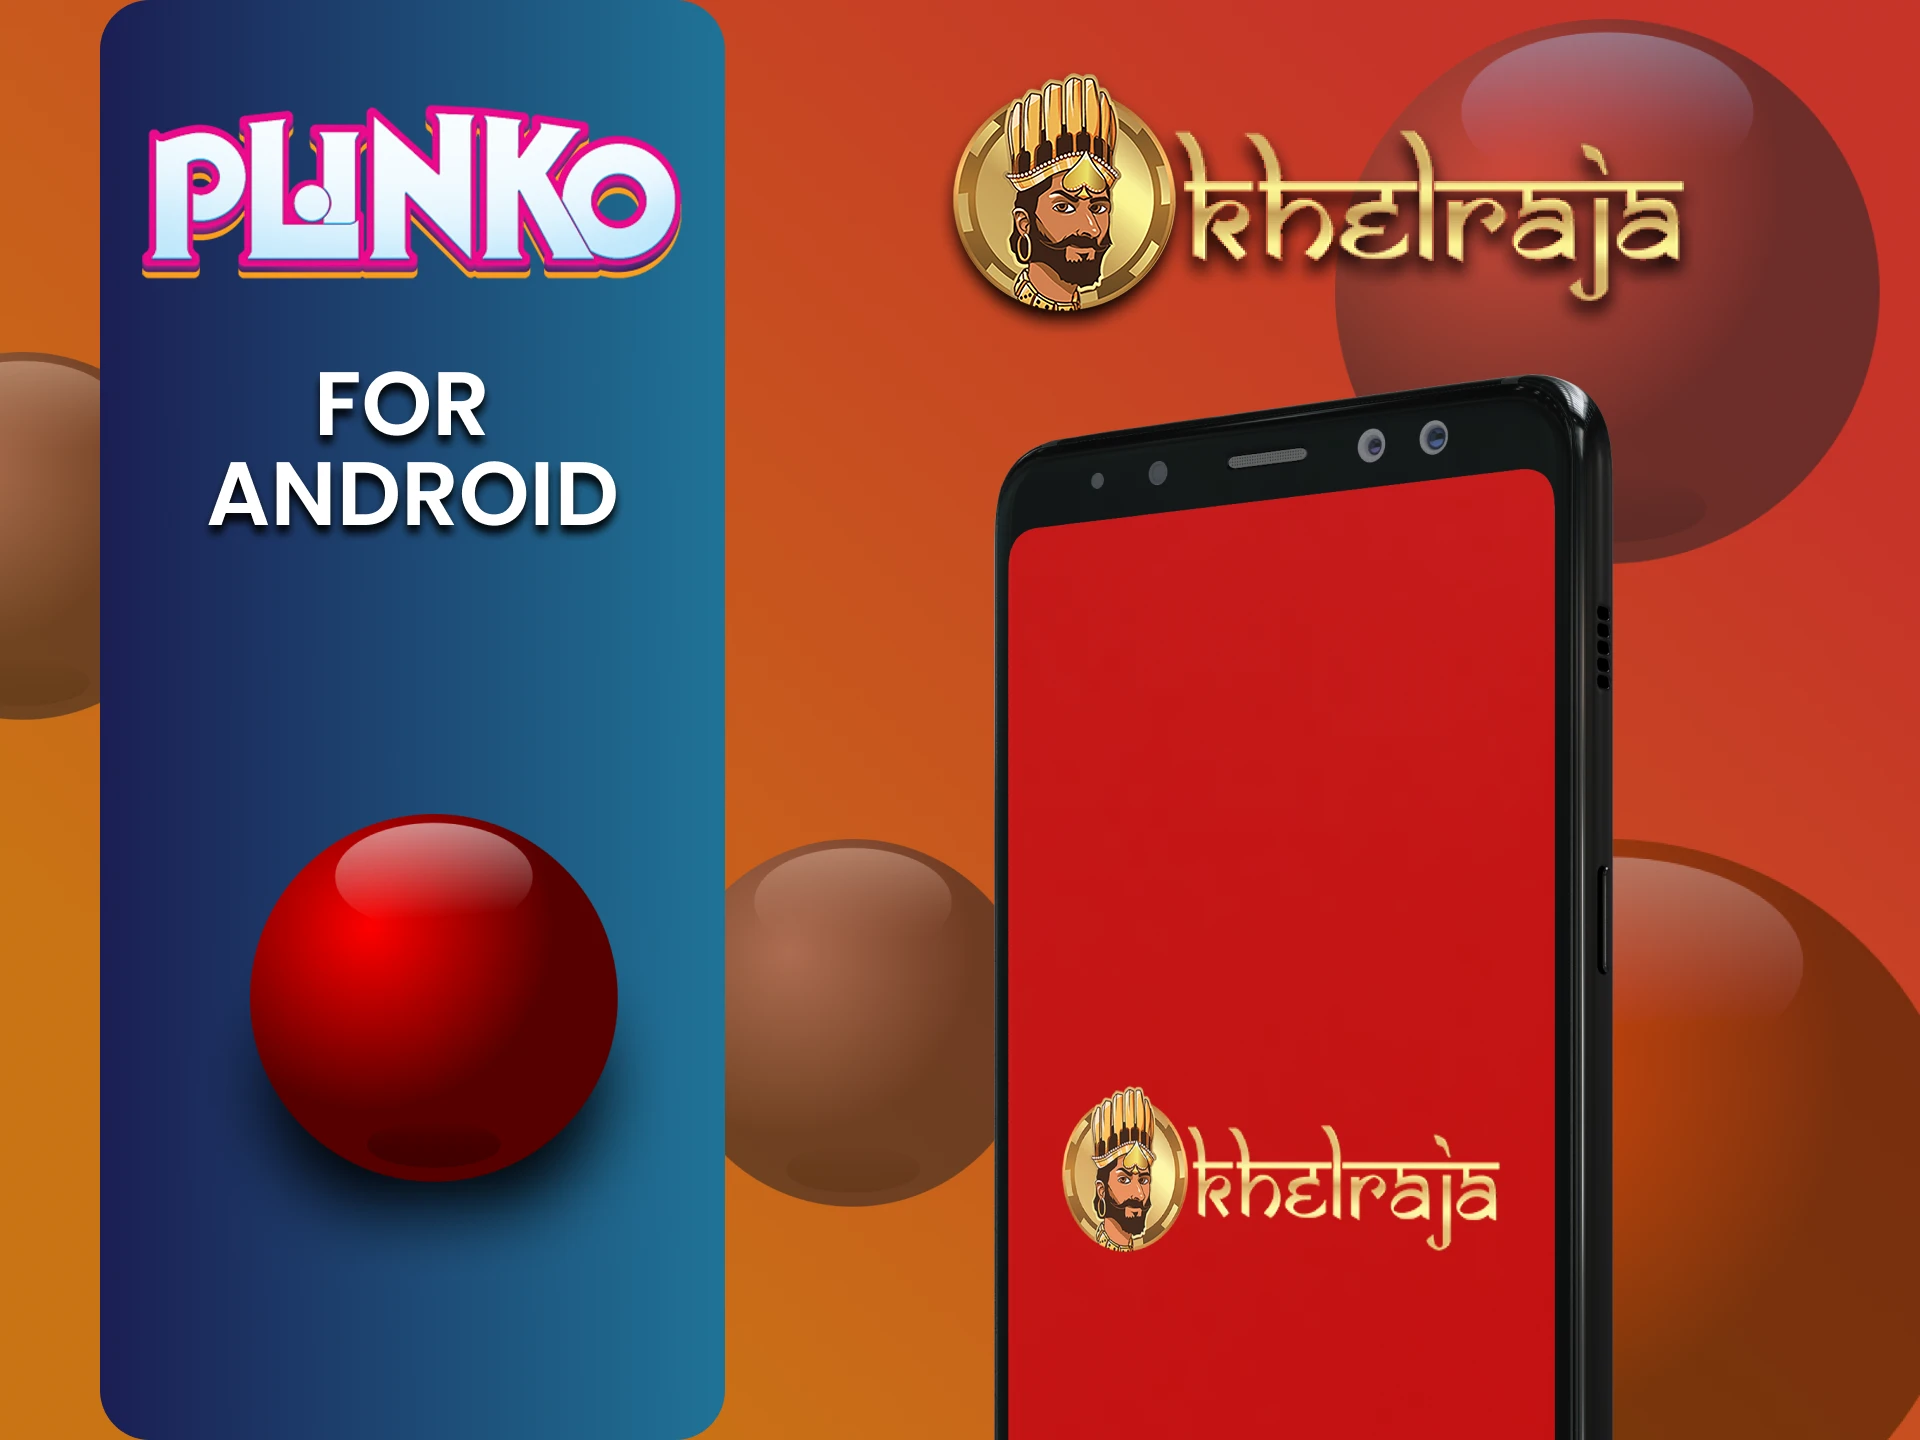 To play Plinko, download the Khelraja app on Android.